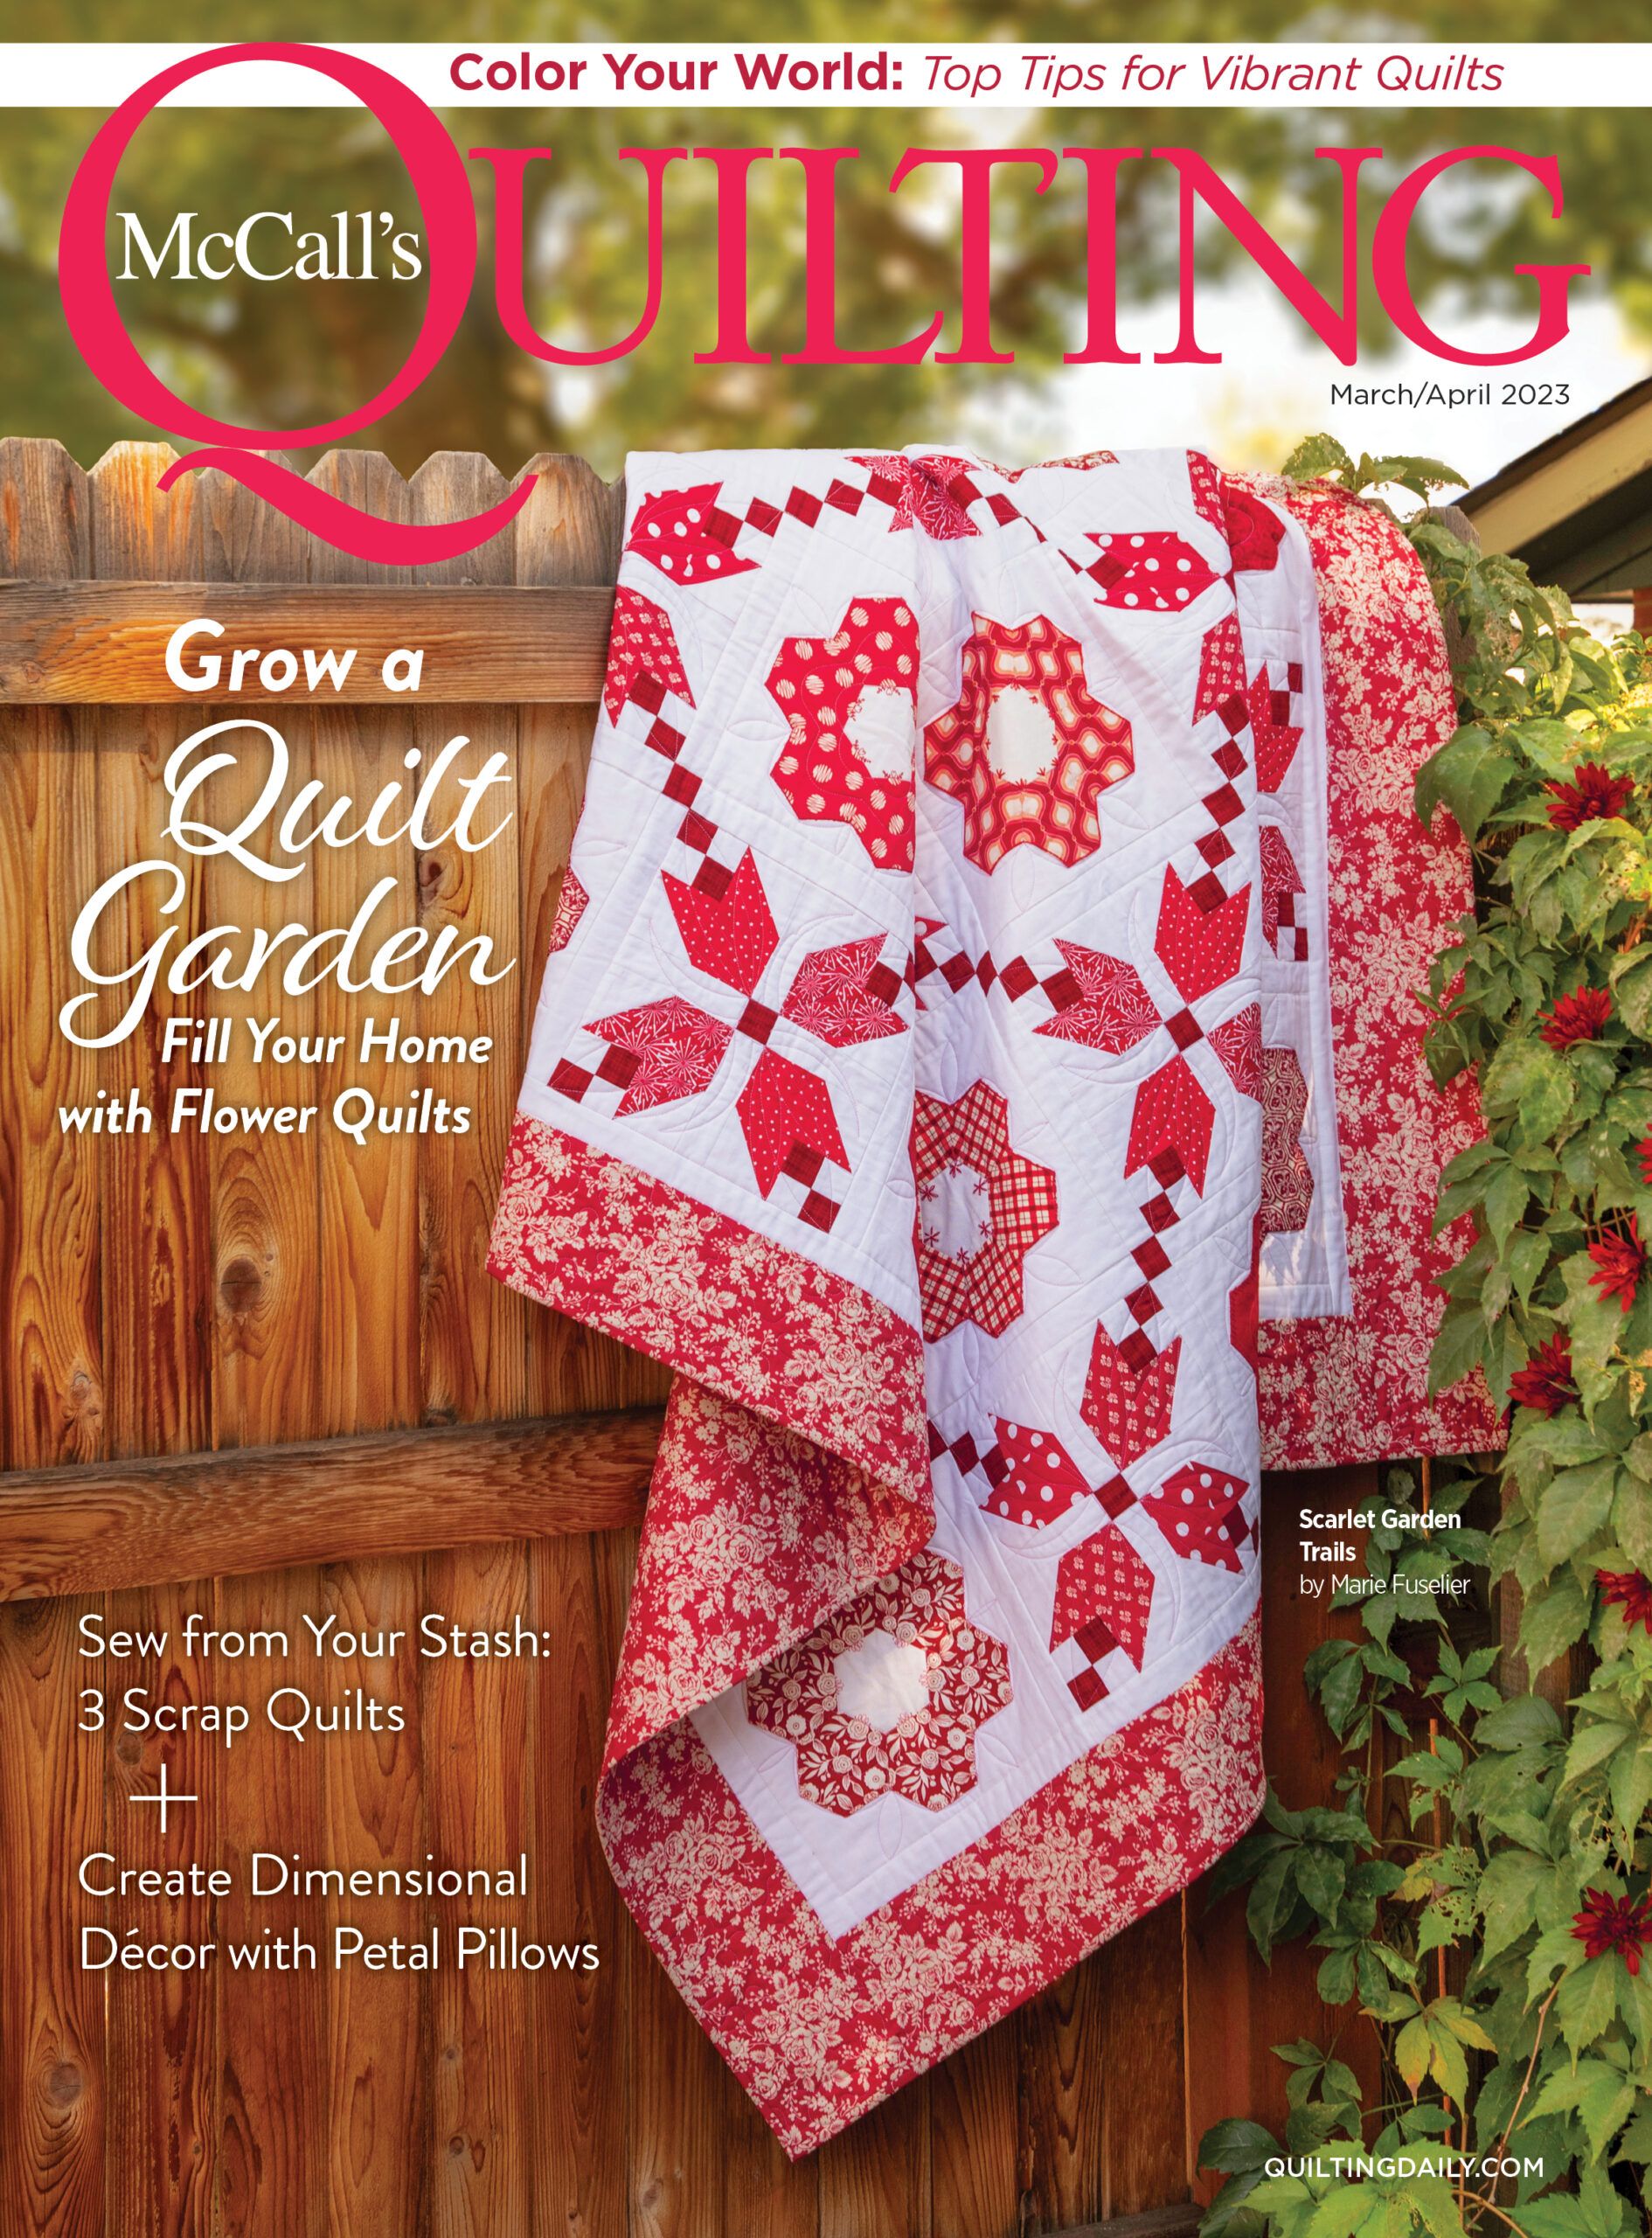 Mccall's Quilting March/April 2023 Digital Edition | Quilting Daily